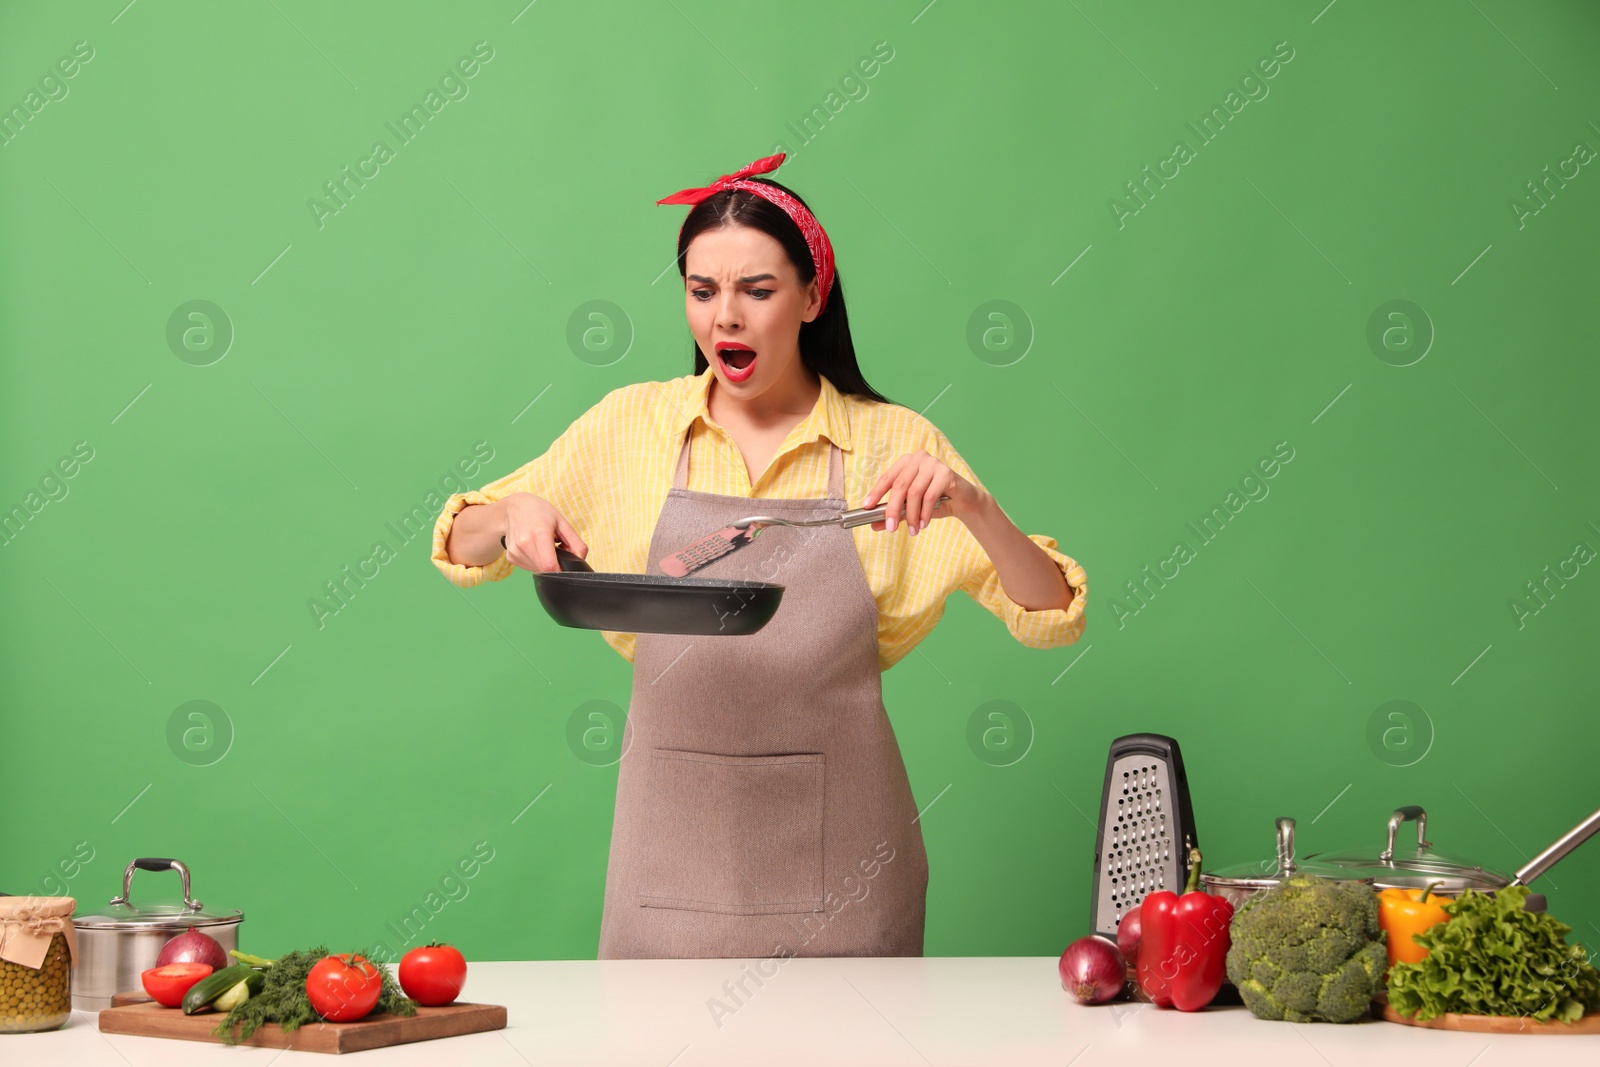 Photo of Emotional housewife with vegetables and different utensils on green background